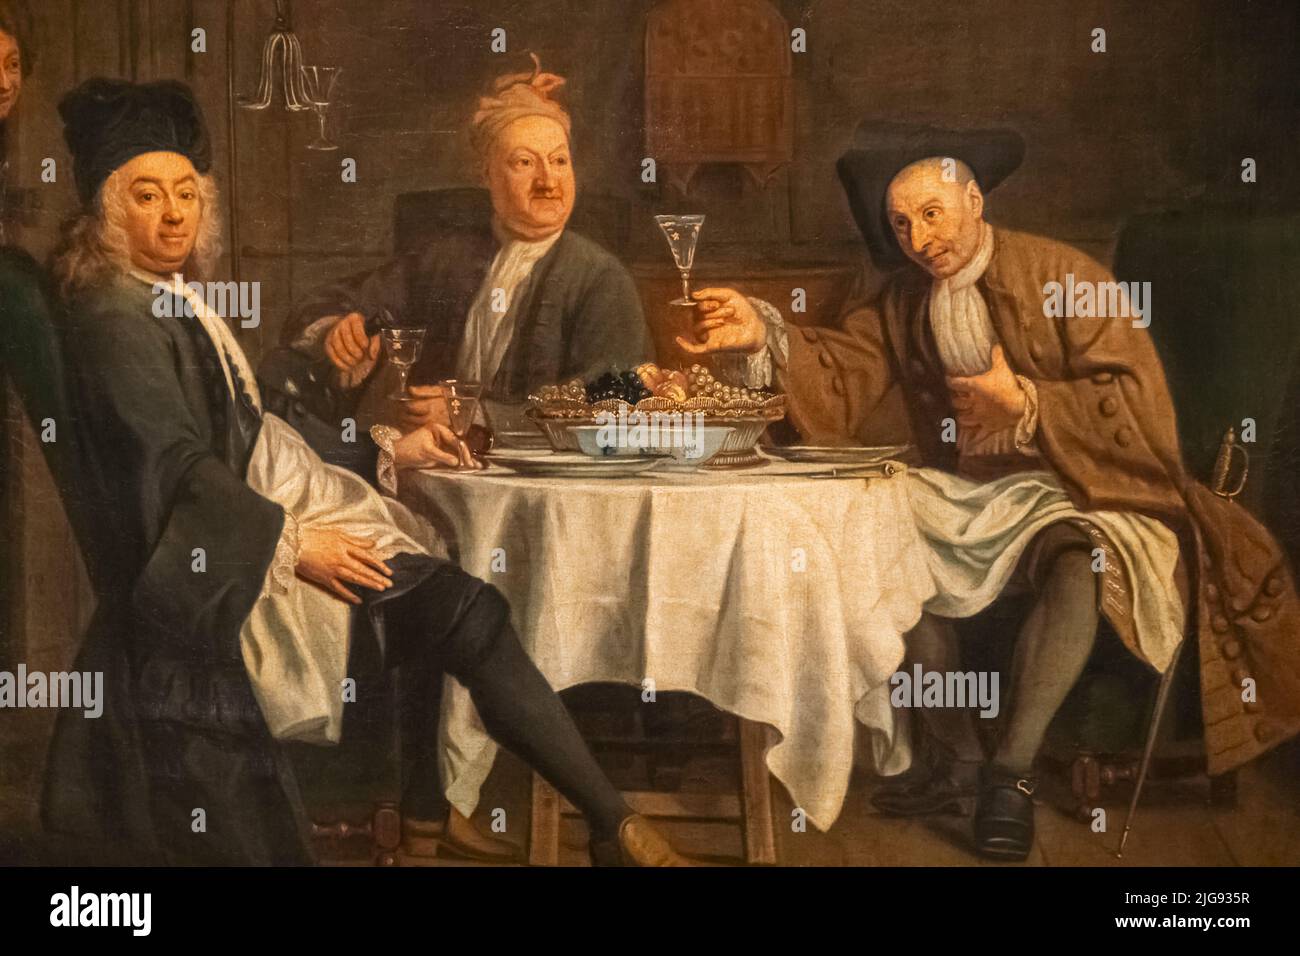 Painting titled 'The Wine Drinkers, or The Poet Piron at Table with his Friends Vade and Colle' by French Jacques Autreau dated 1747 Stock Photo